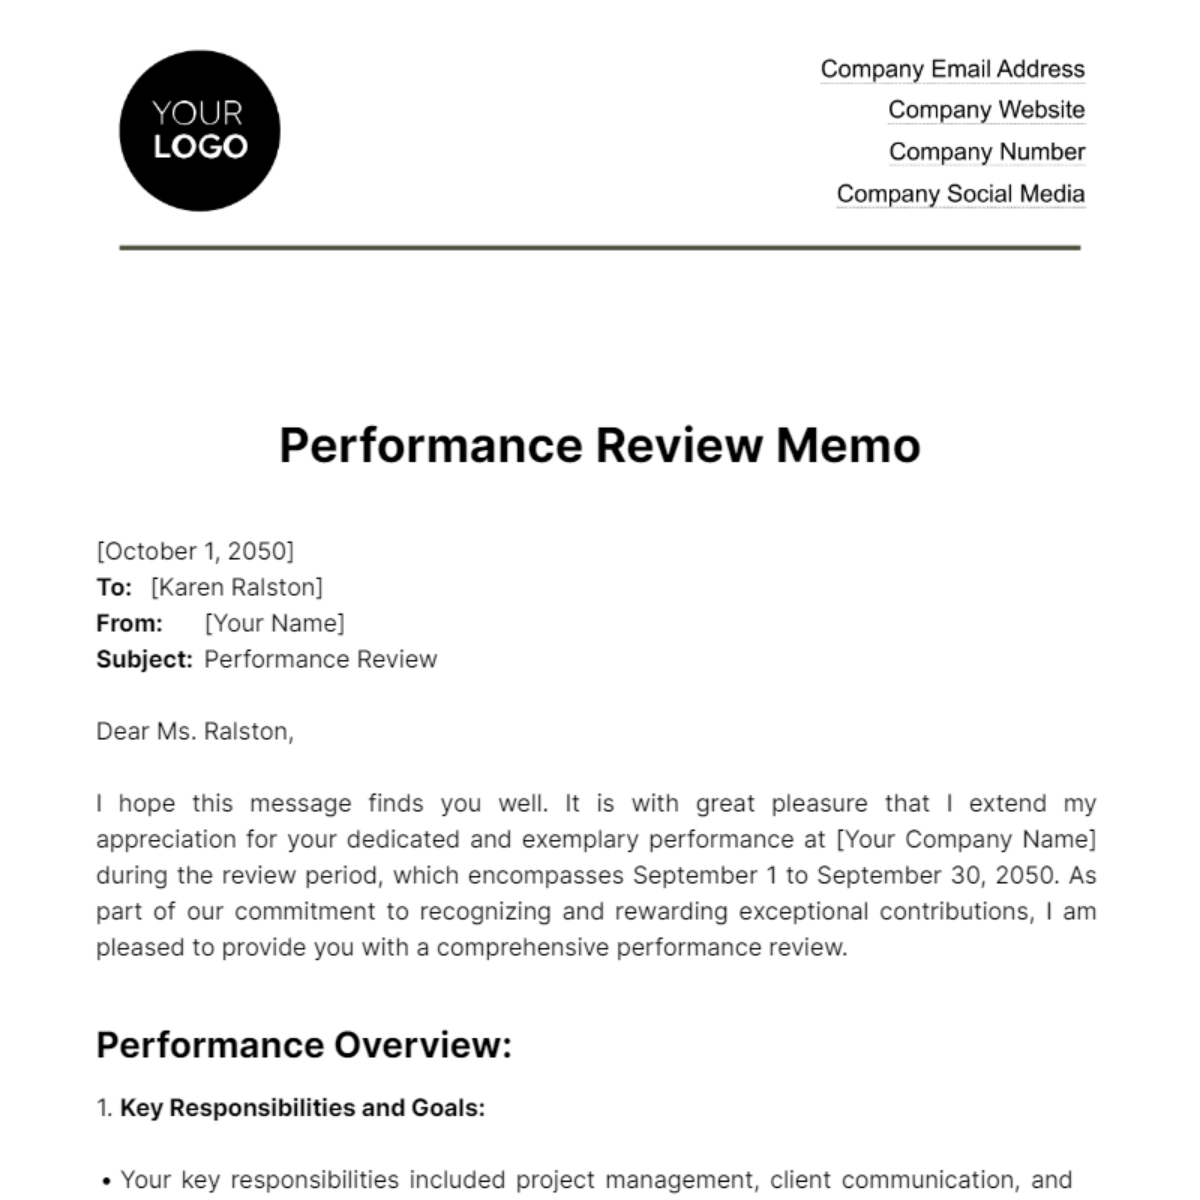 Performance Review Memo HR Template